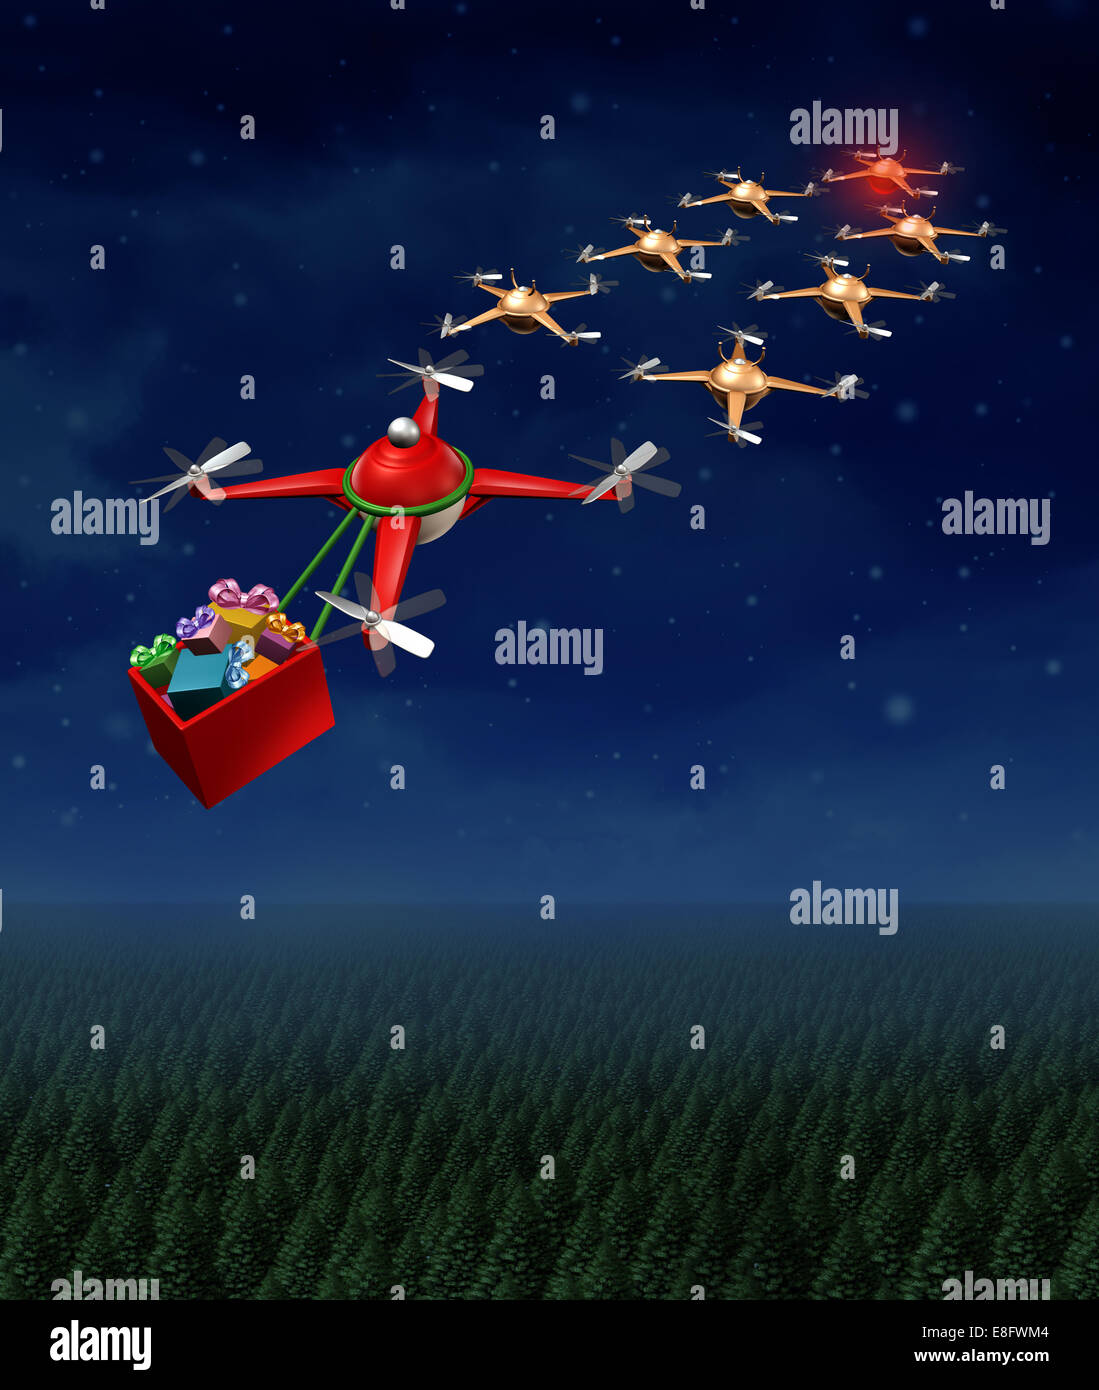 Drone christmas sled concept as group of organized drones in a reindeer sleigh formation with a santaclause flying quadrocopter Stock Photo